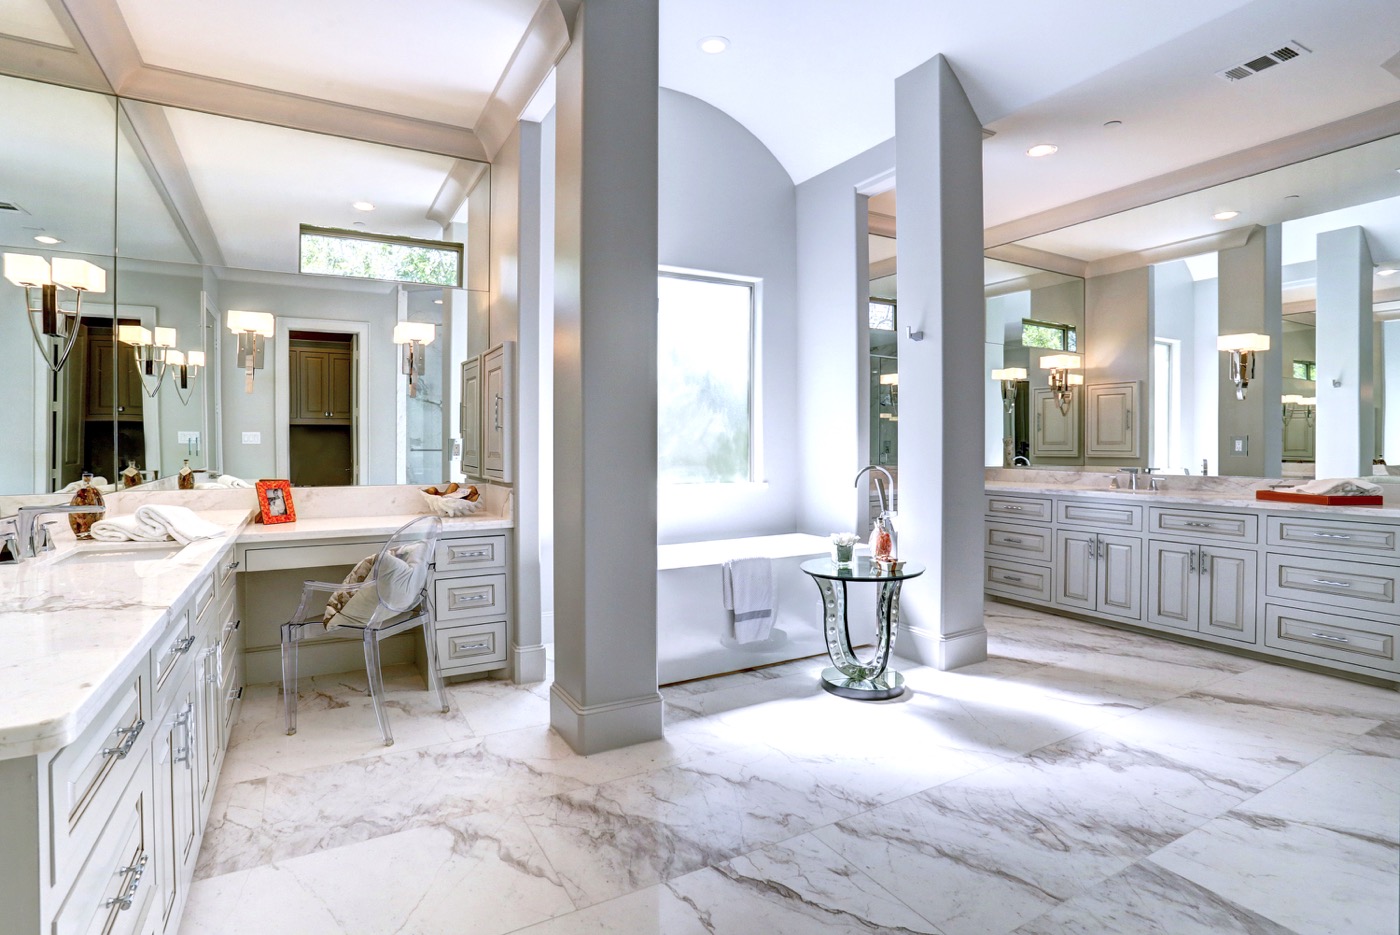 Spacious master bathroom features a modern tub by the frosted window